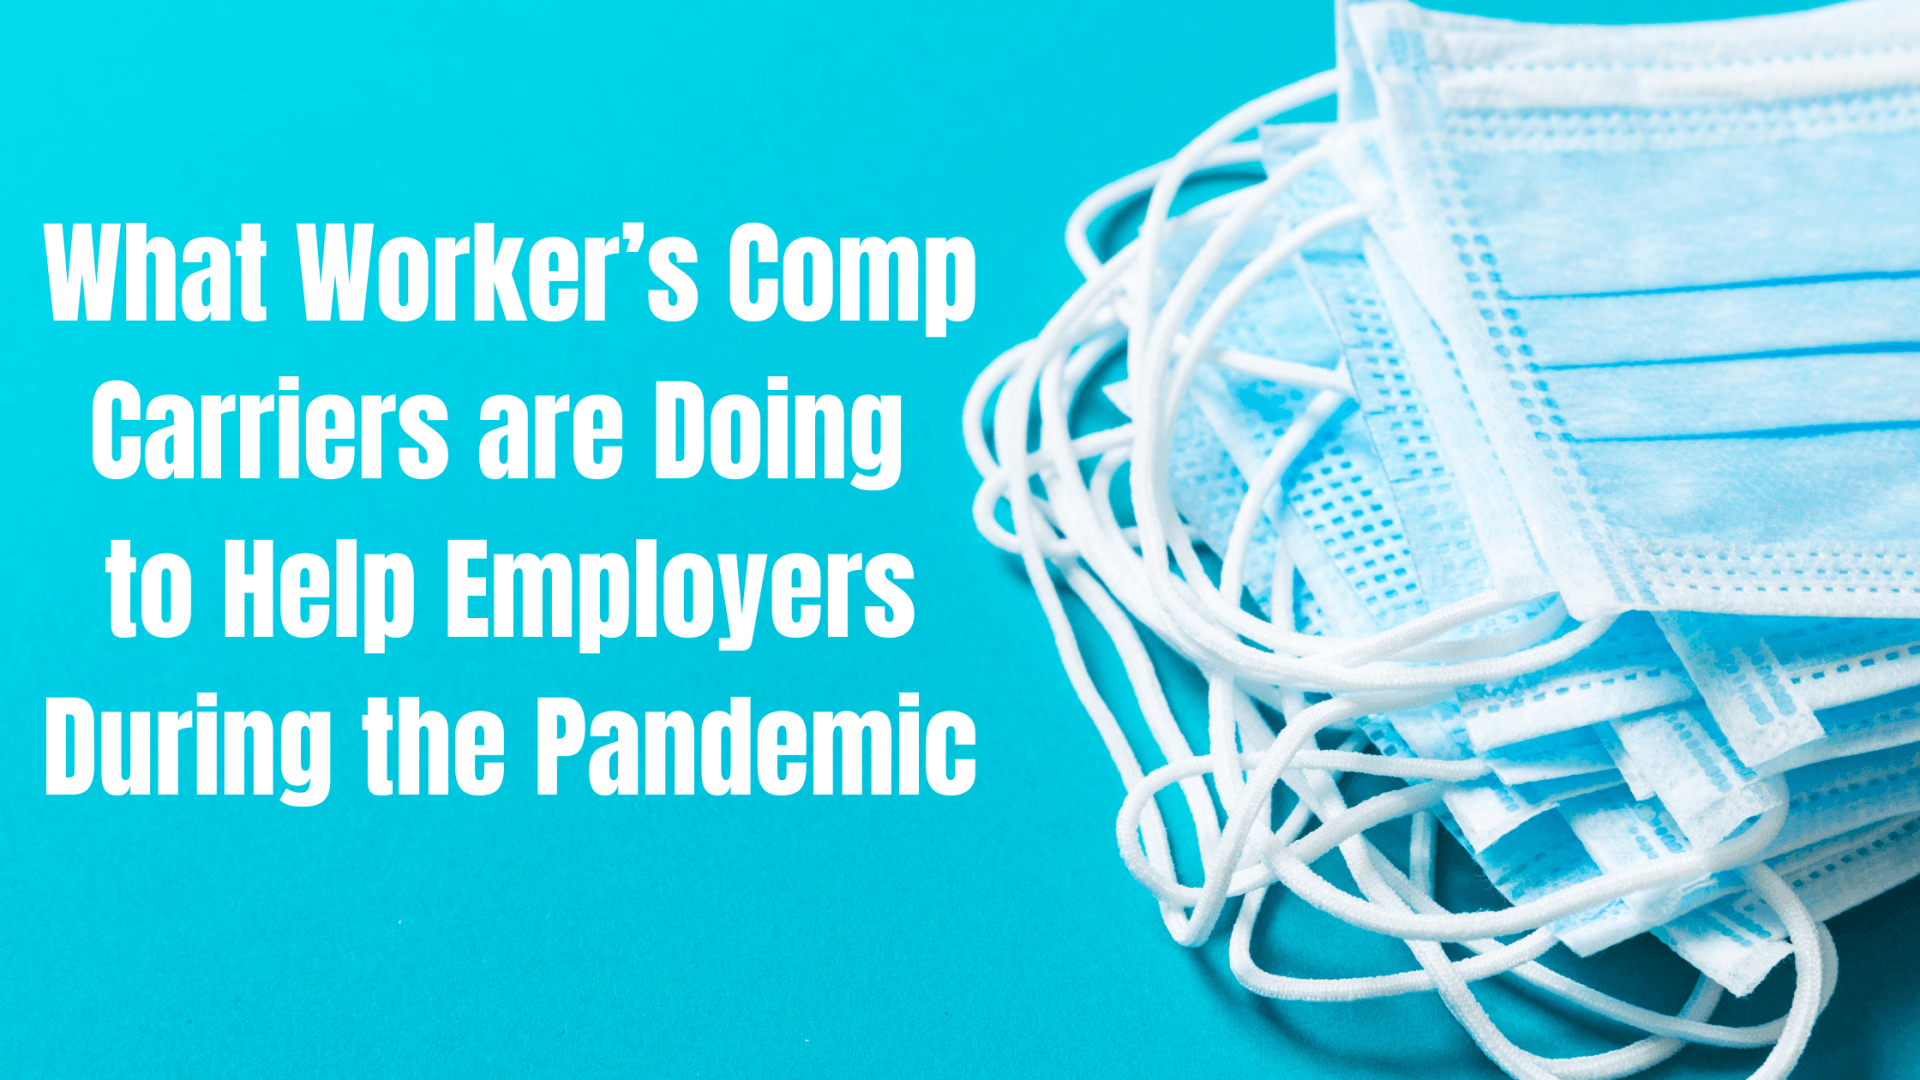 What Worker’s Comp Carriers are Doing to Help Employers During the Pandemic